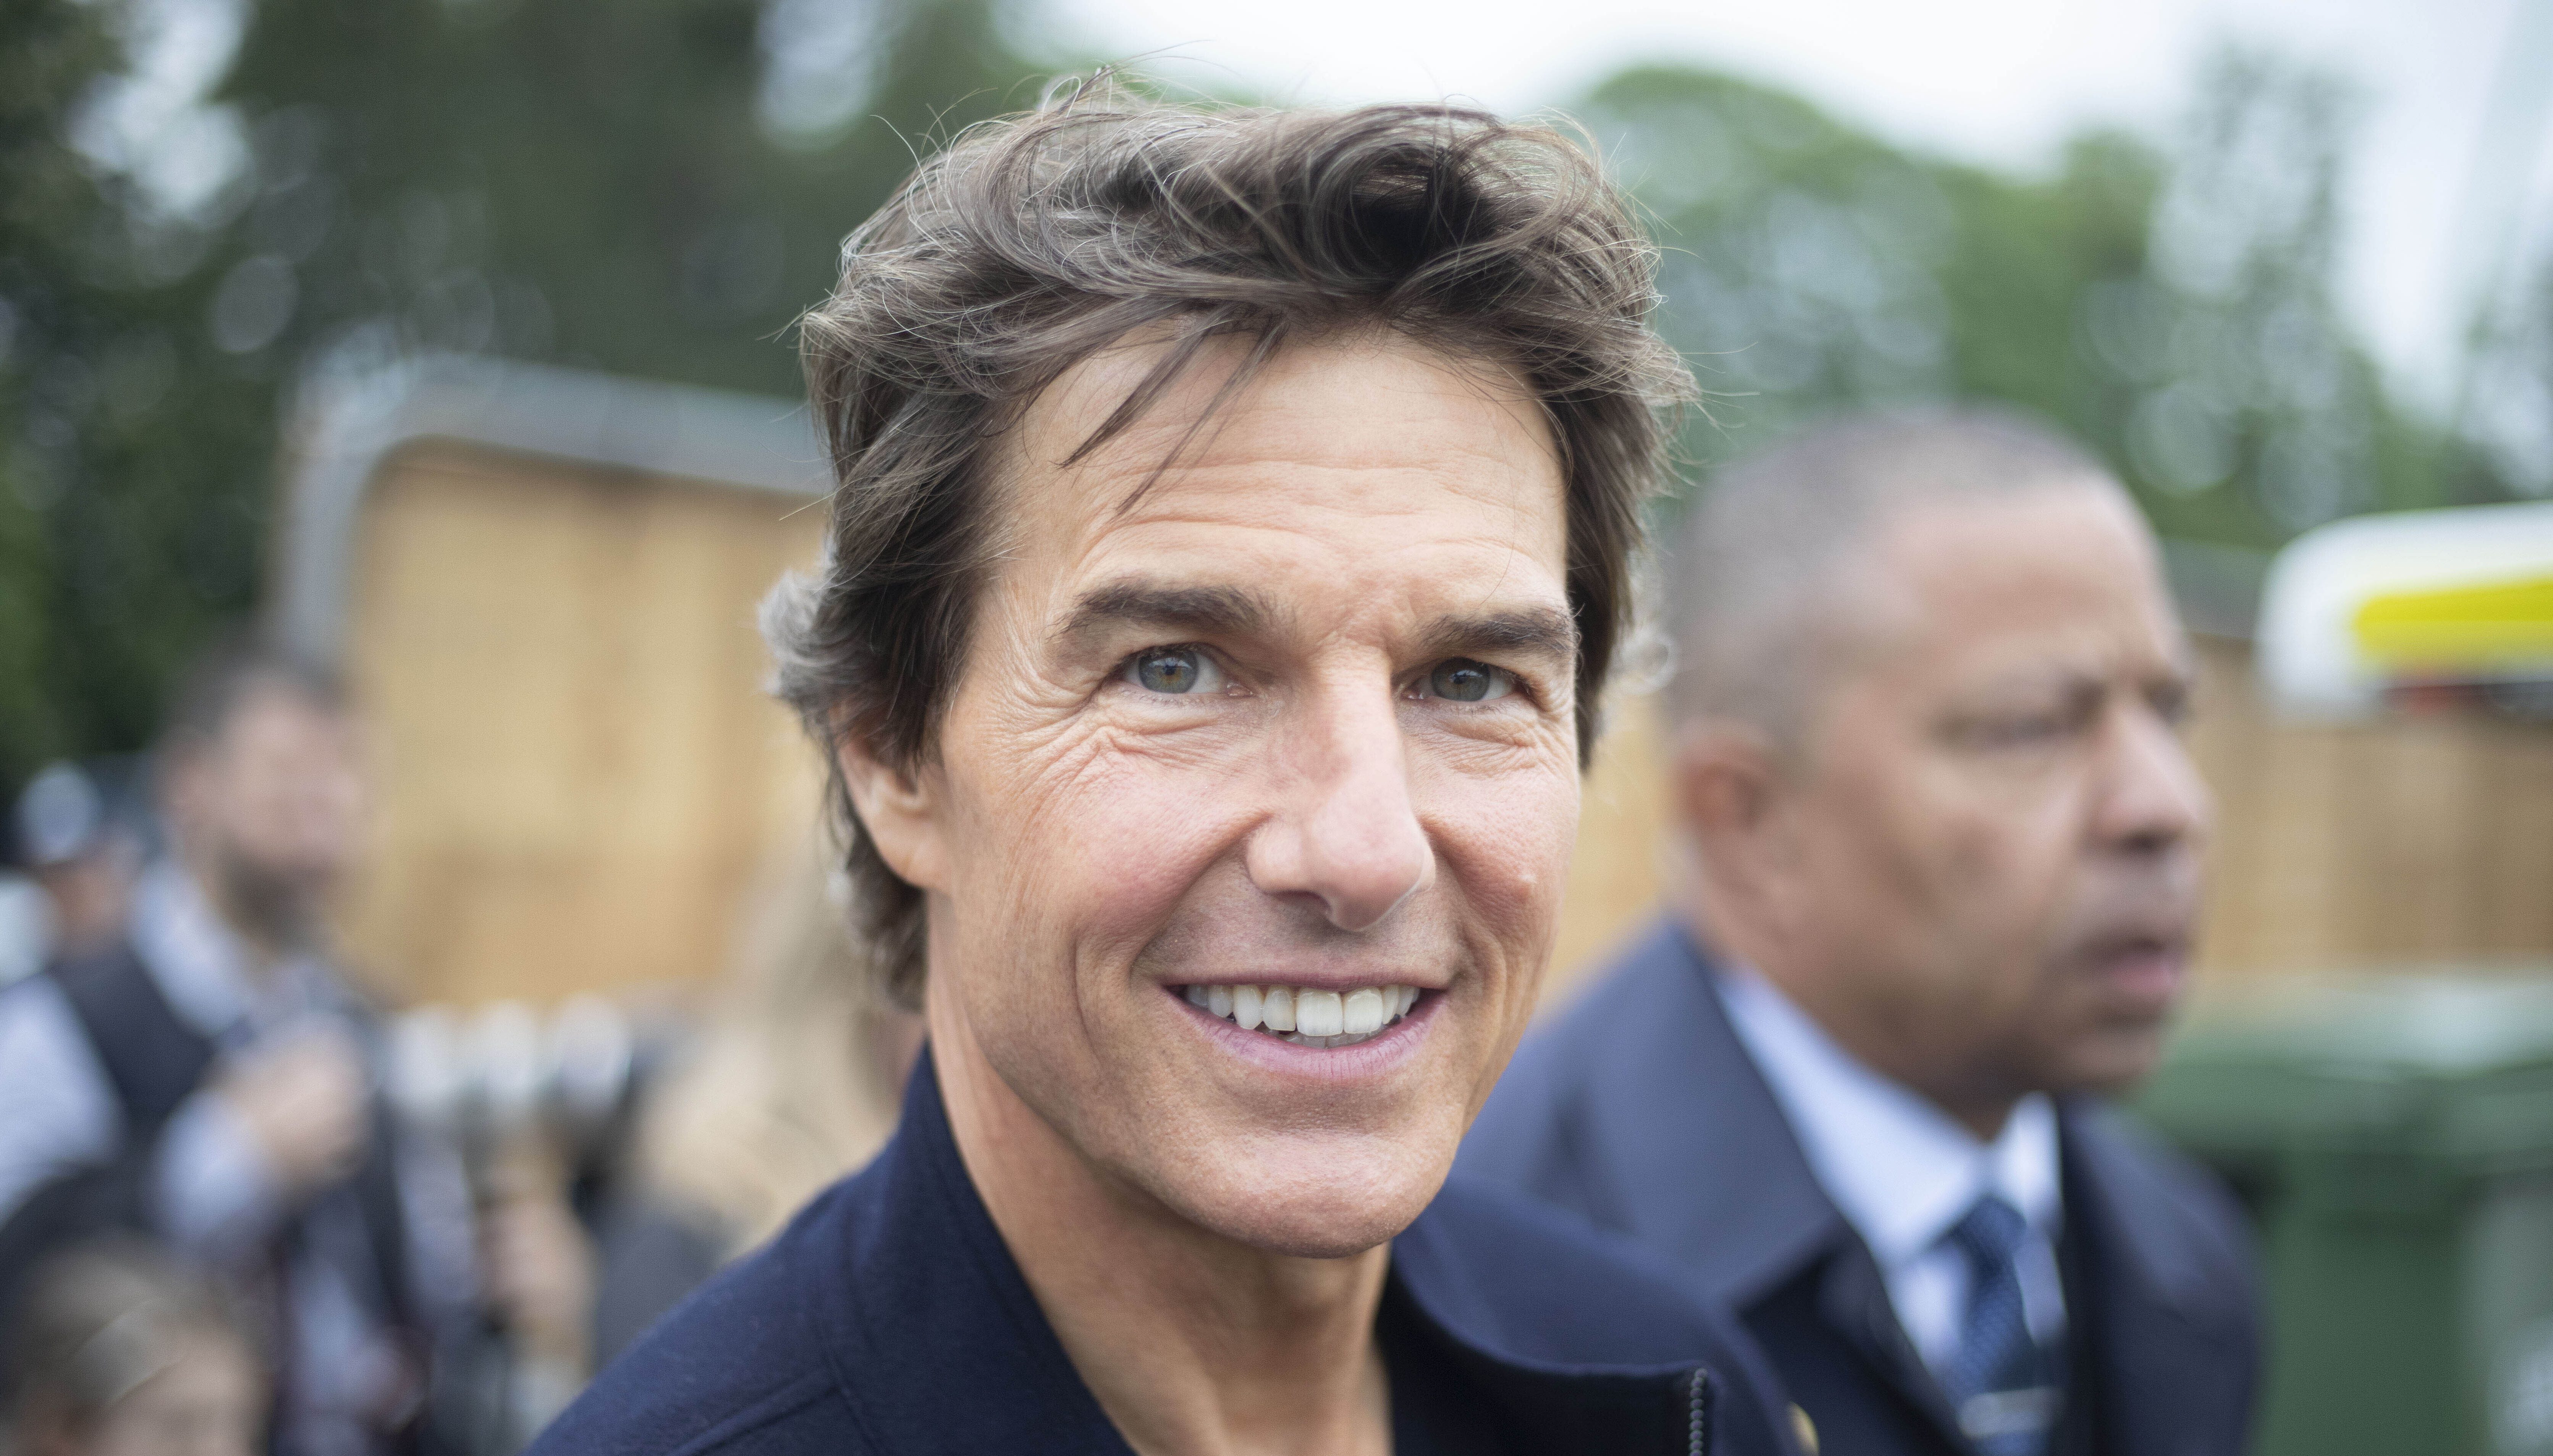 Tom Cruise At Cannes: How 'Taps' Was His Film School, 'Top Gun 2' Meant For Big Screen